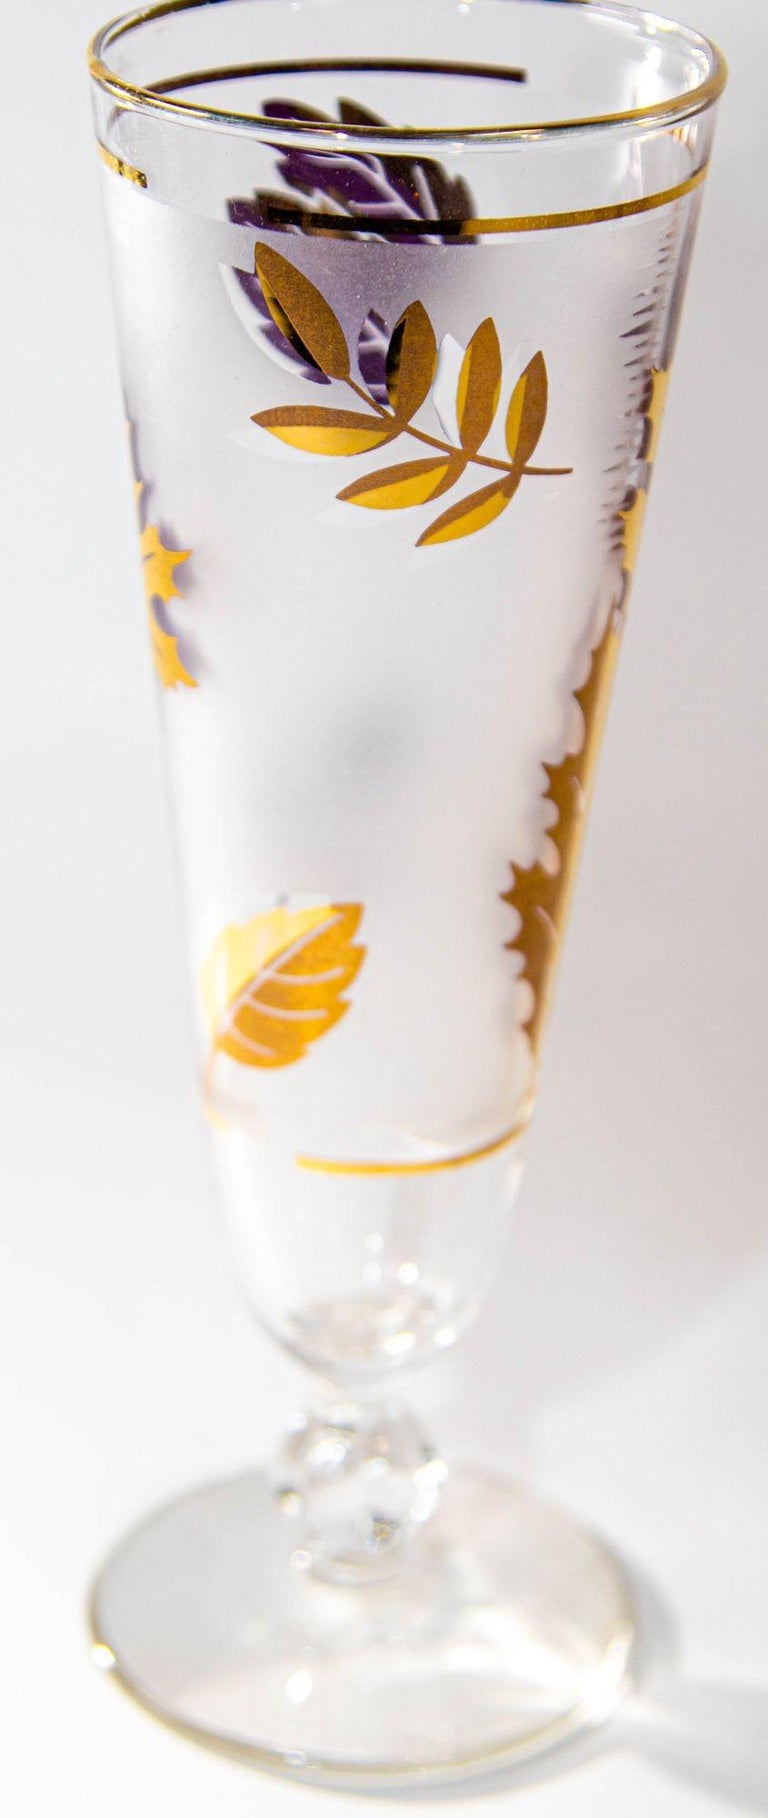 https://a.1stdibscdn.com/1950s-libbey-golden-foliage-pilsner-glass-set-of-6-frosted-with-gold-leaf-for-sale-picture-16/f_9068/f_352067721689222233151/15_Collectible_Tumbler_Vintage_1950s_Luxury_Barware_Drinking_Cocktail_Glasses_17_master.jpeg?width=768